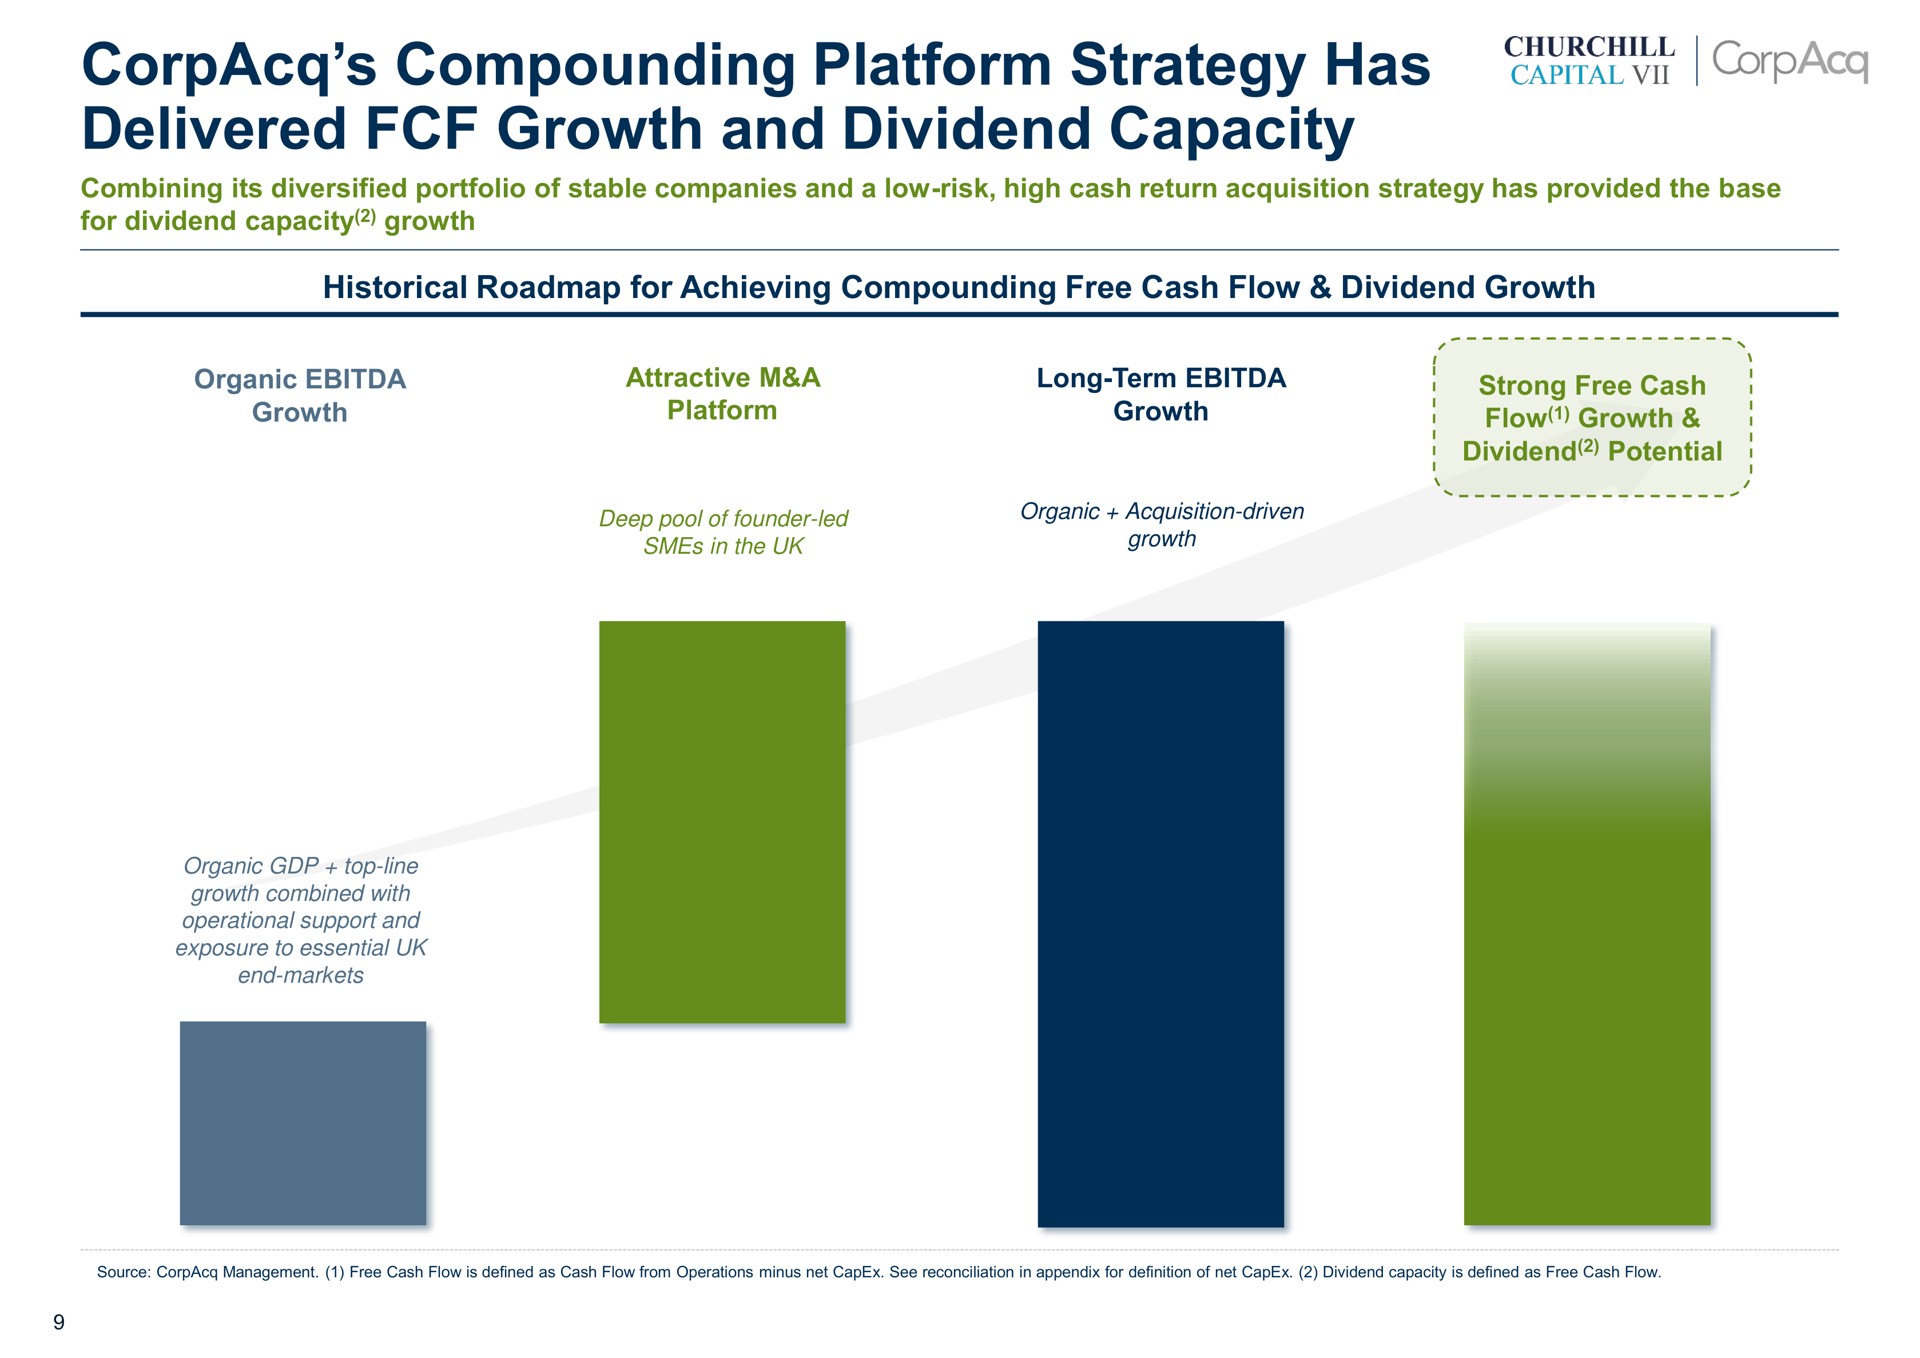 compounding platform strategy has delivered growth and dividend capacity flow potential crown | CorpAcq